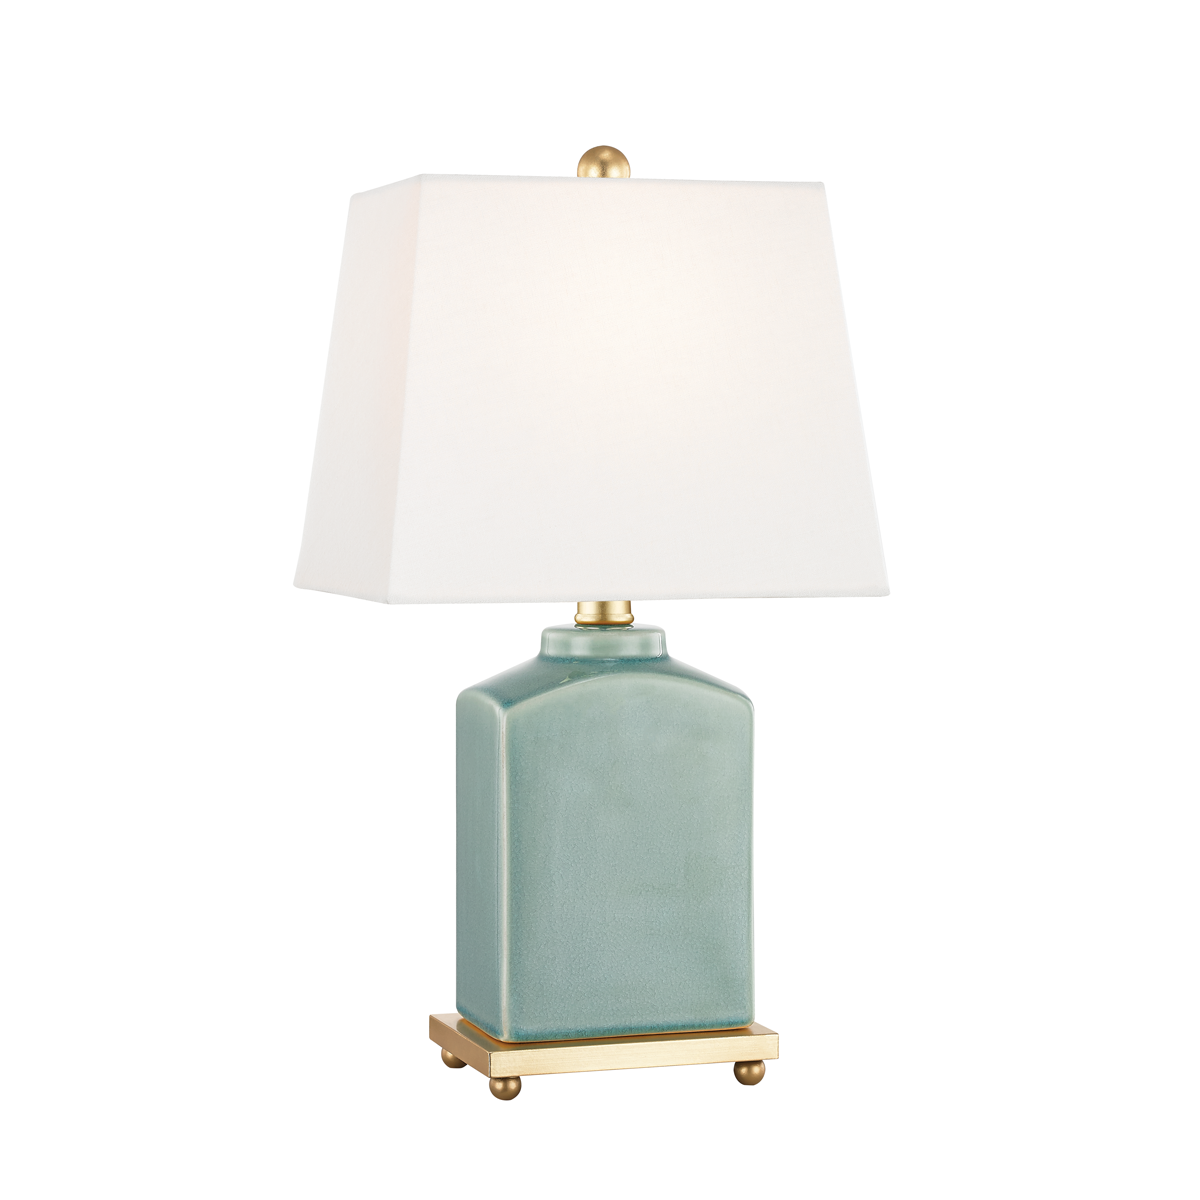 Brynn Jade Porcelain Table Lamp by Kevin Francis Design | Luxury Home Decor